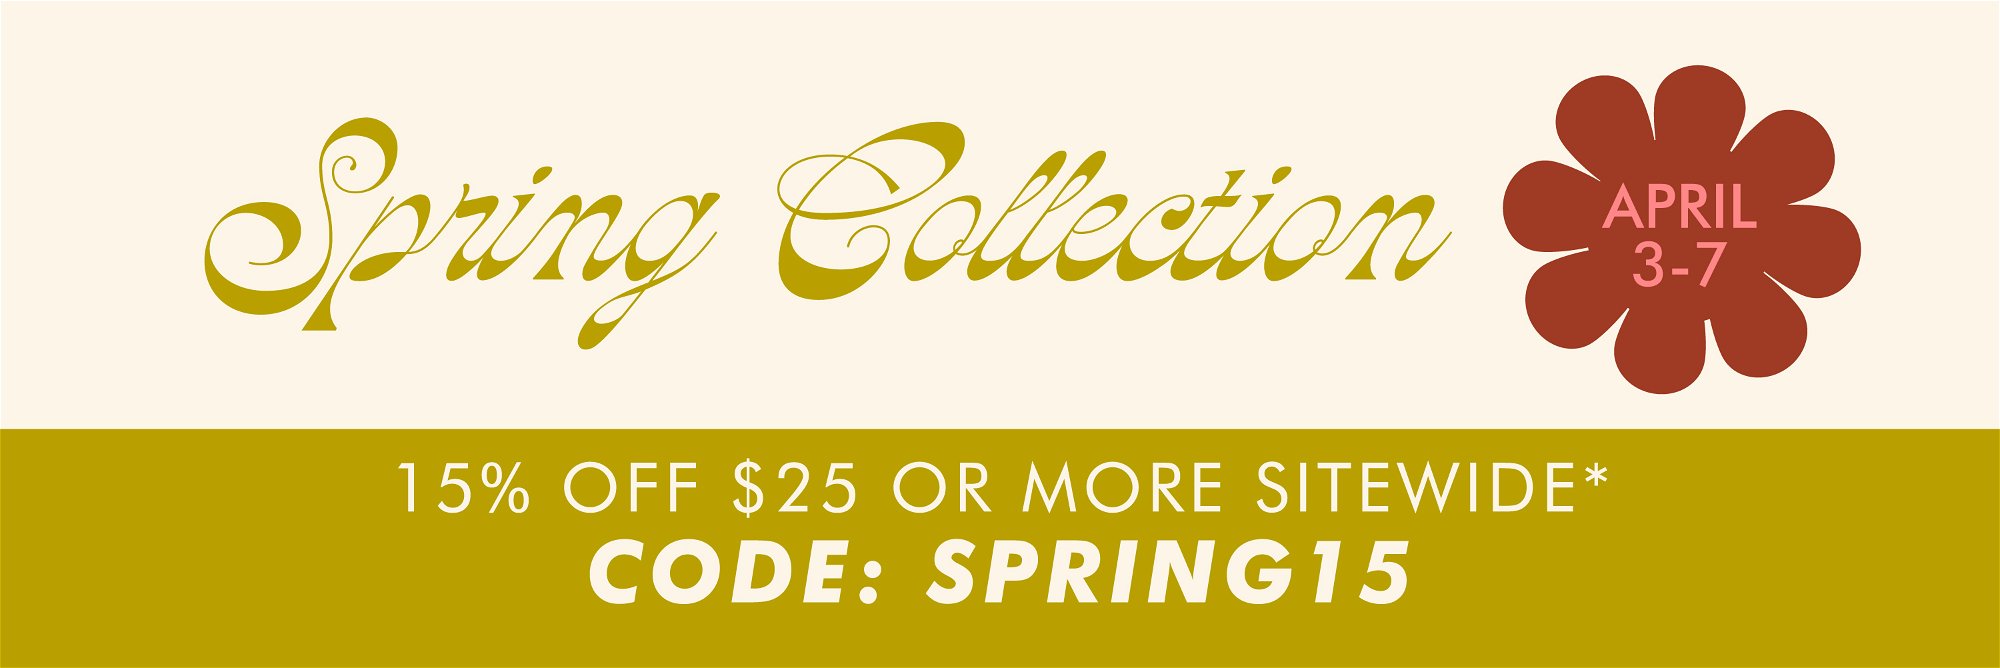 Spring Collection April 3-7. 15% off $25 or more sitewide with code SPRING15